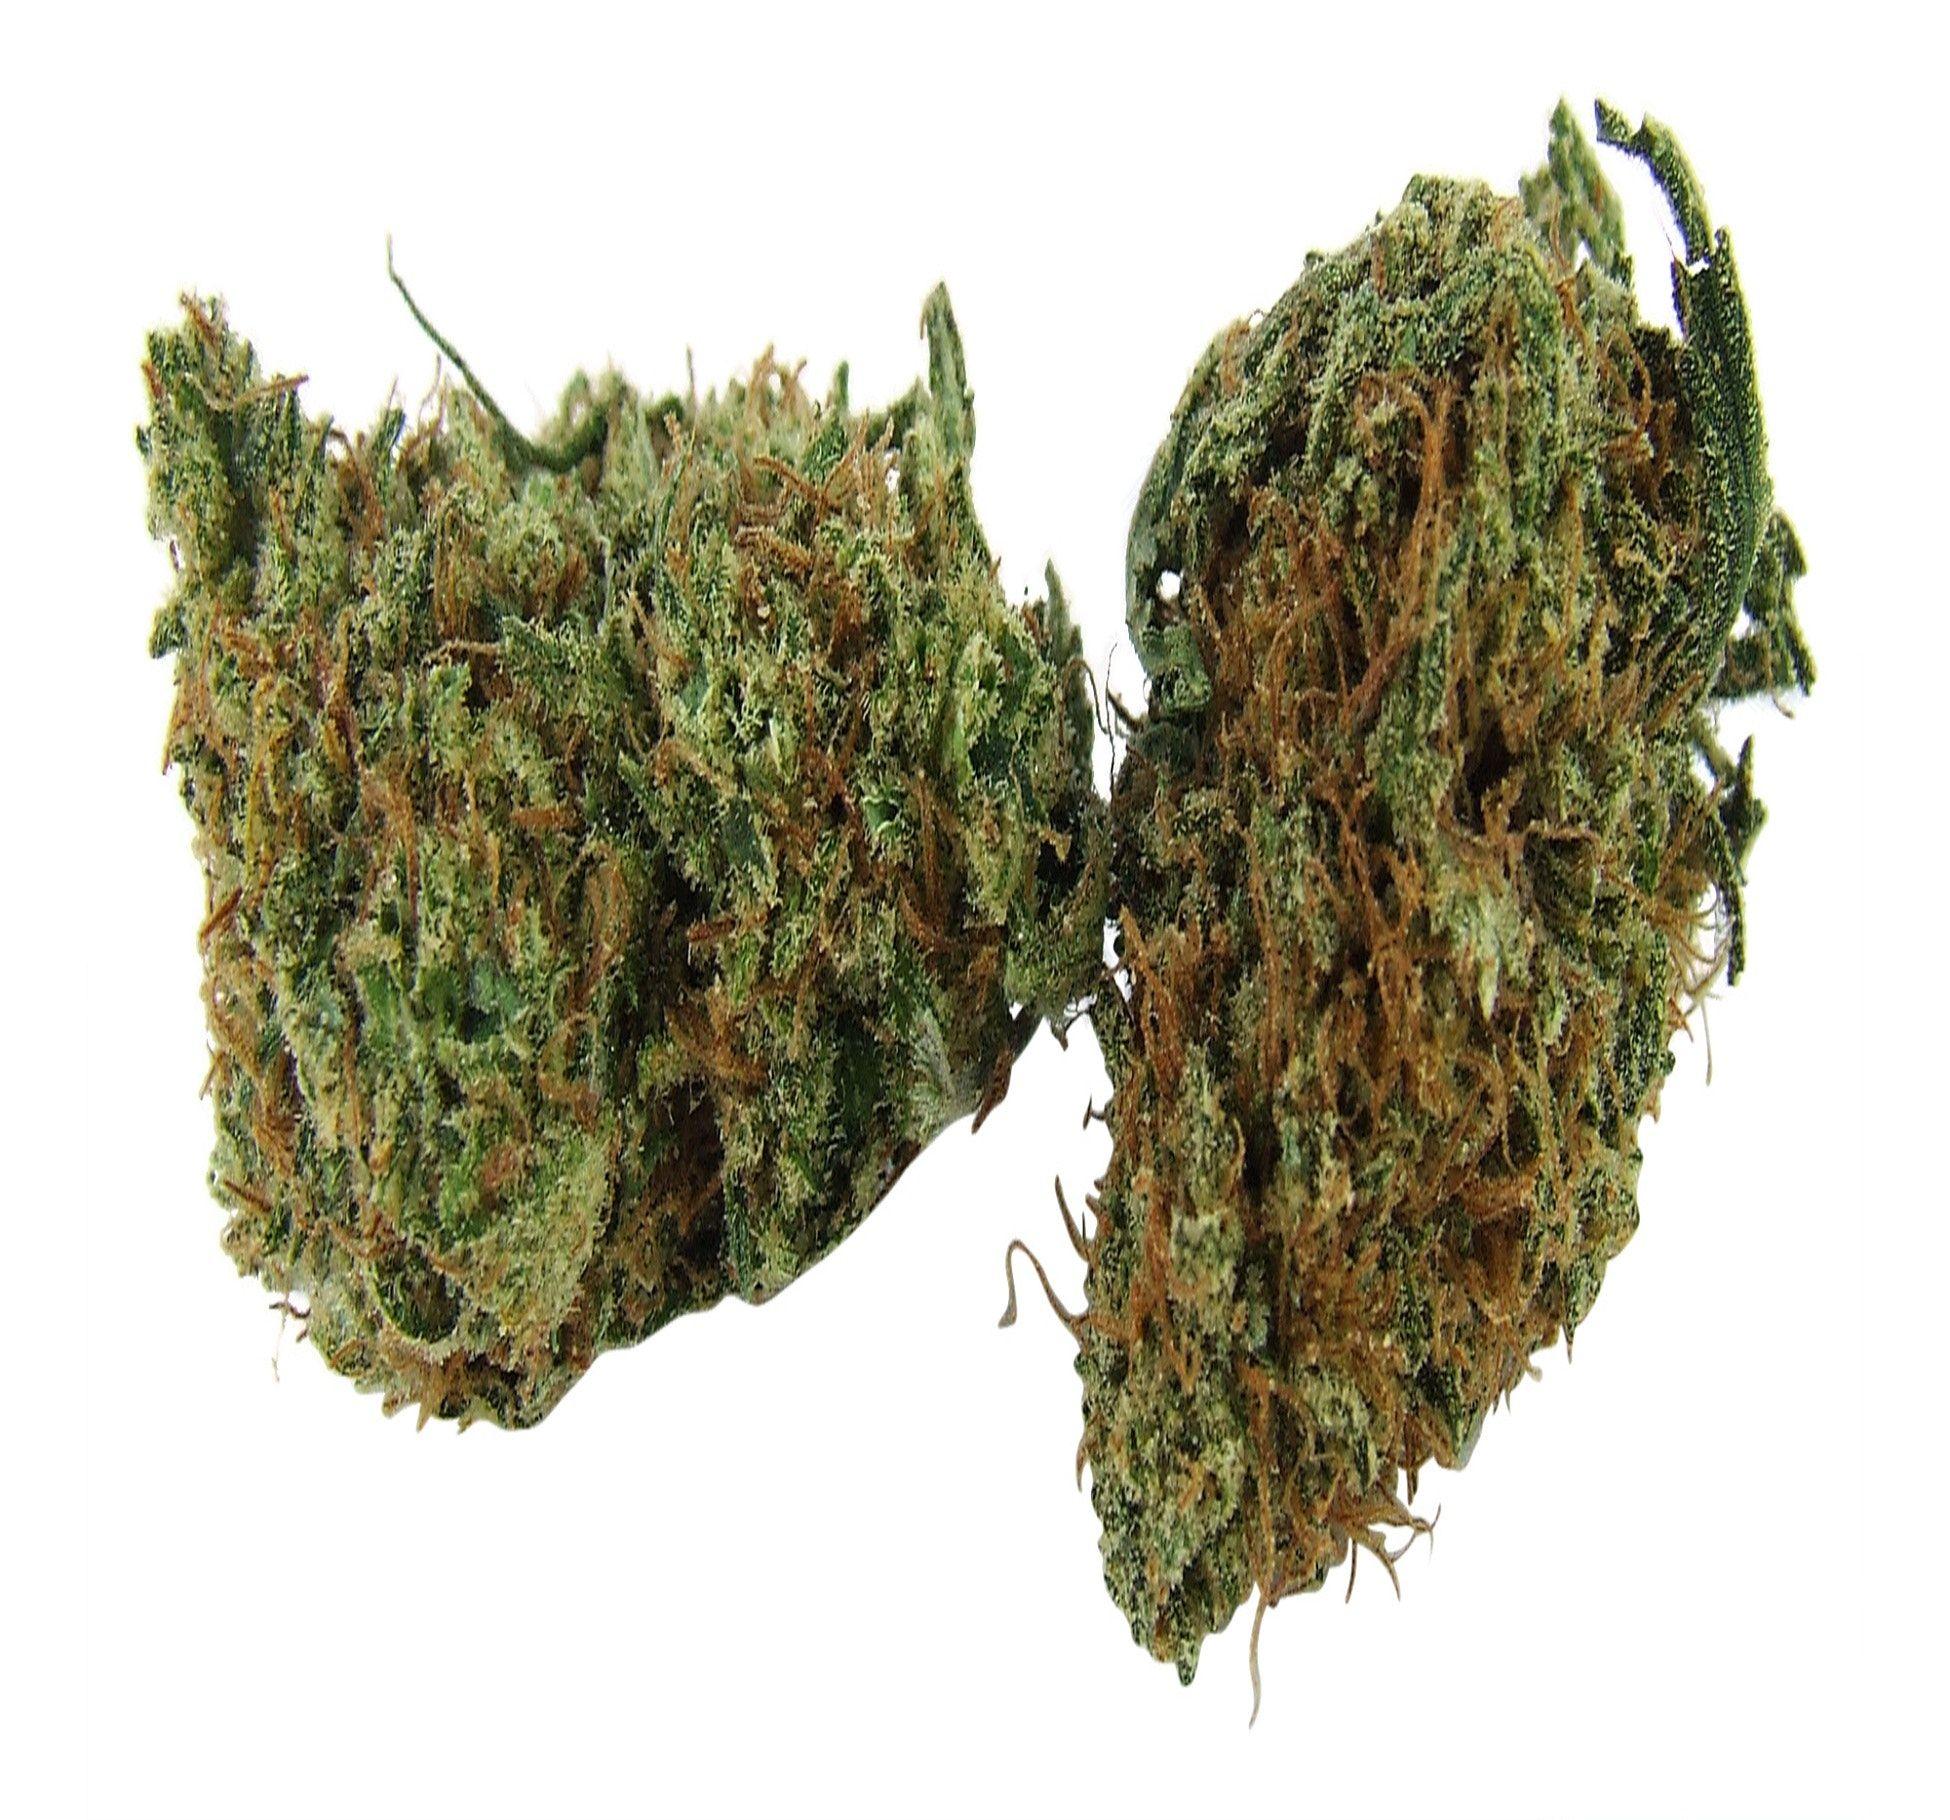 Free of buy weed online canada, mail order weed canada